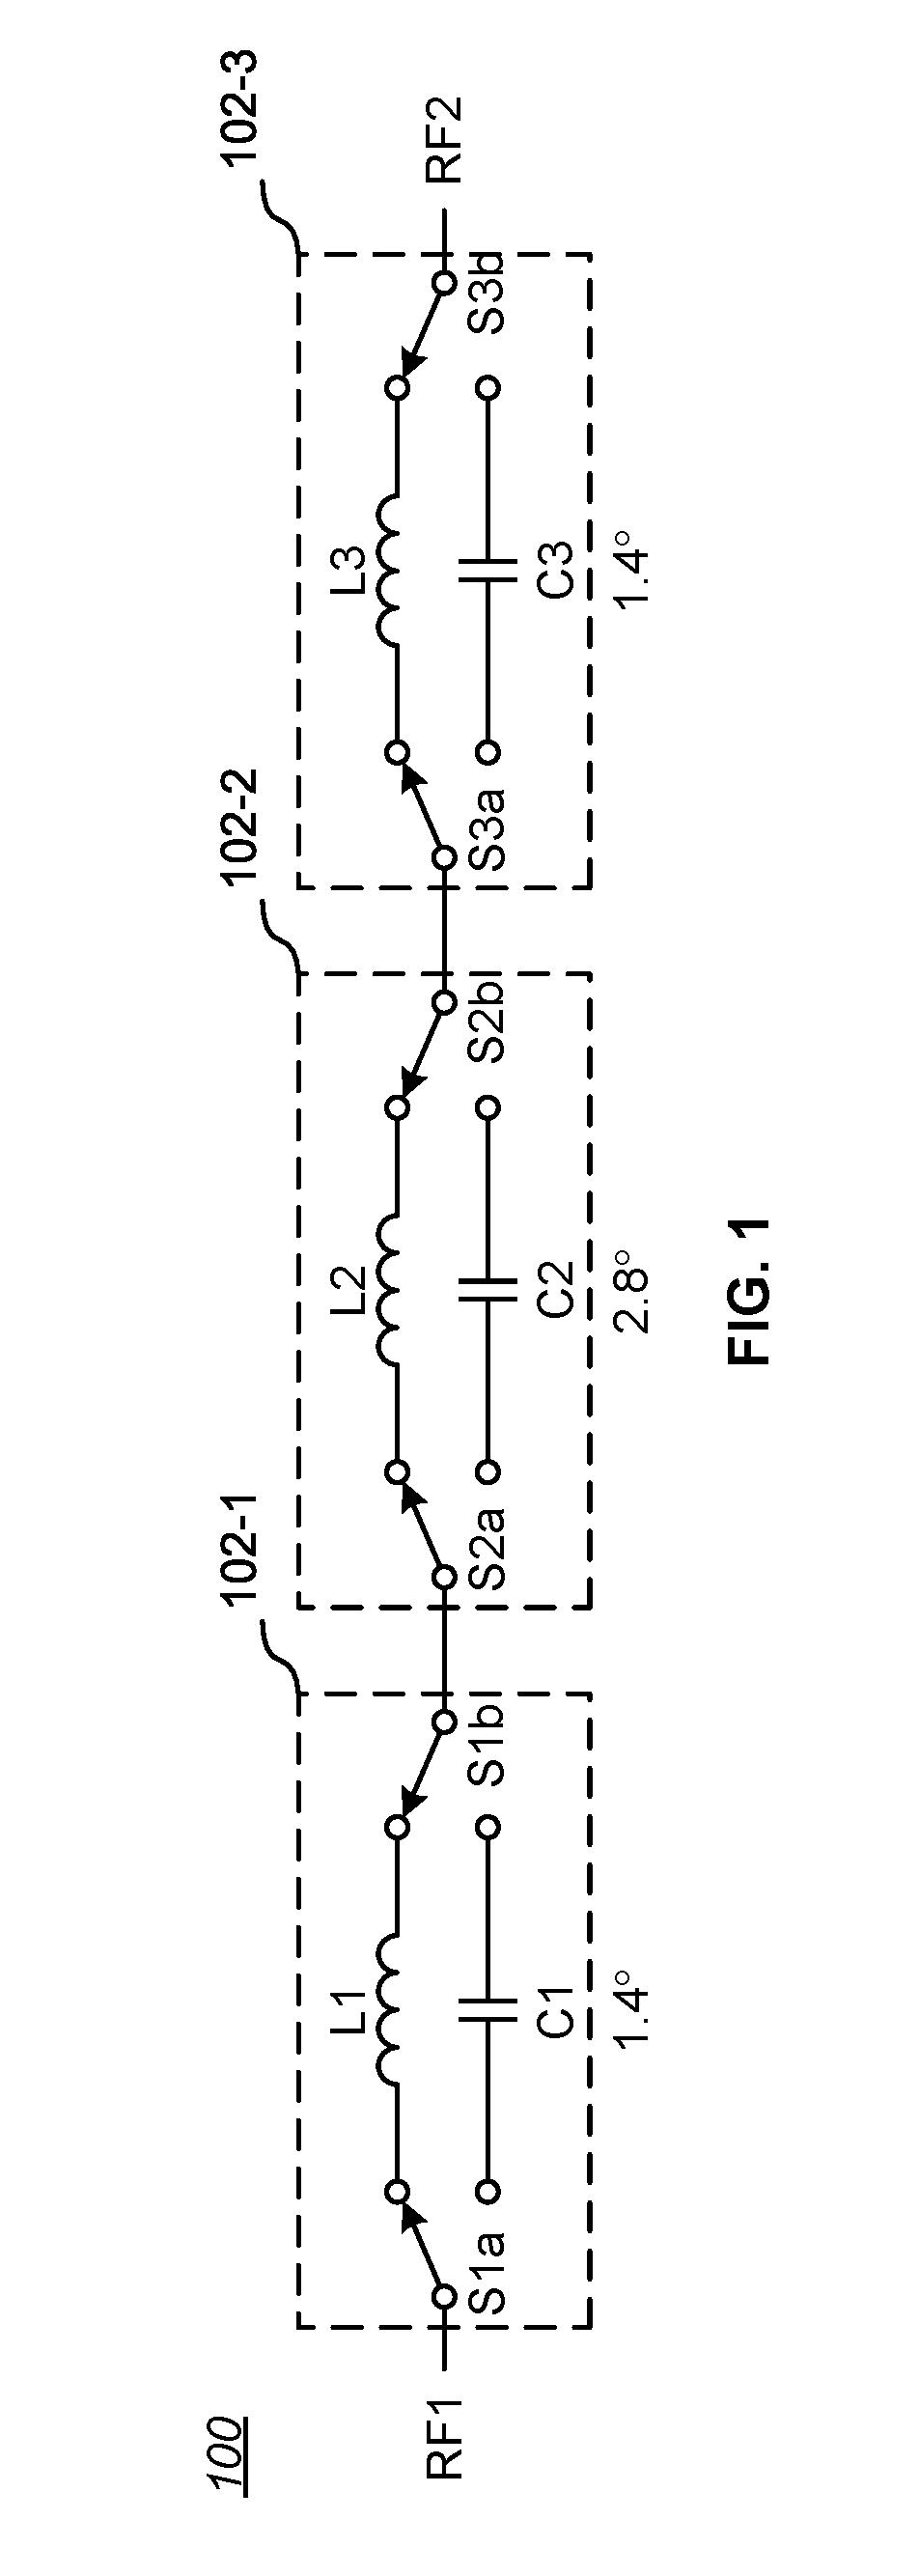 Low loss multi-state phase shifter